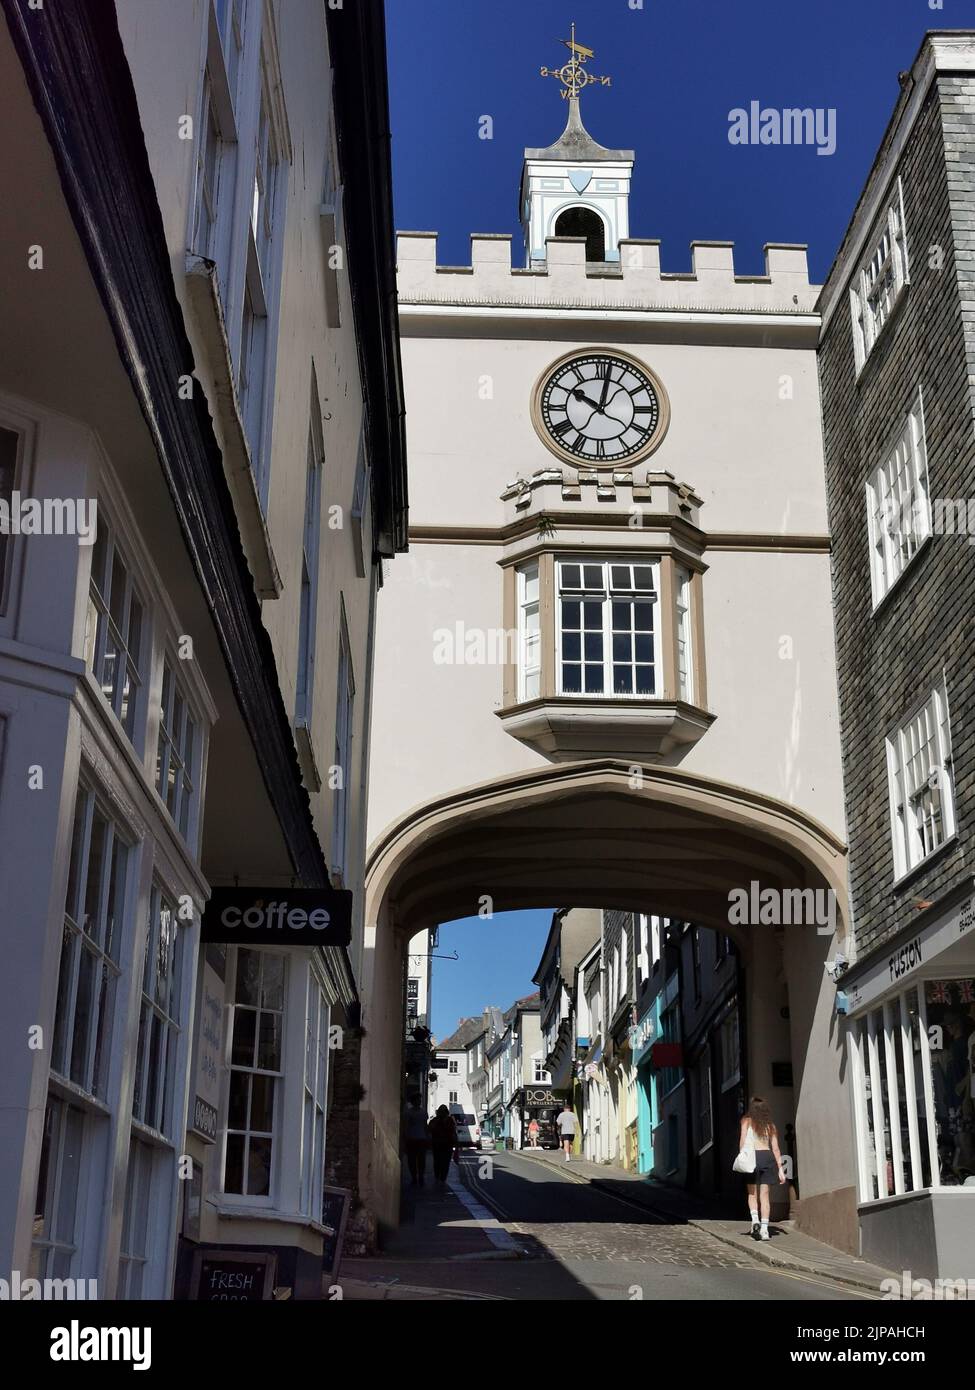 East Gate arch and clock tower, Totnes, Devon, UK Stock Photo